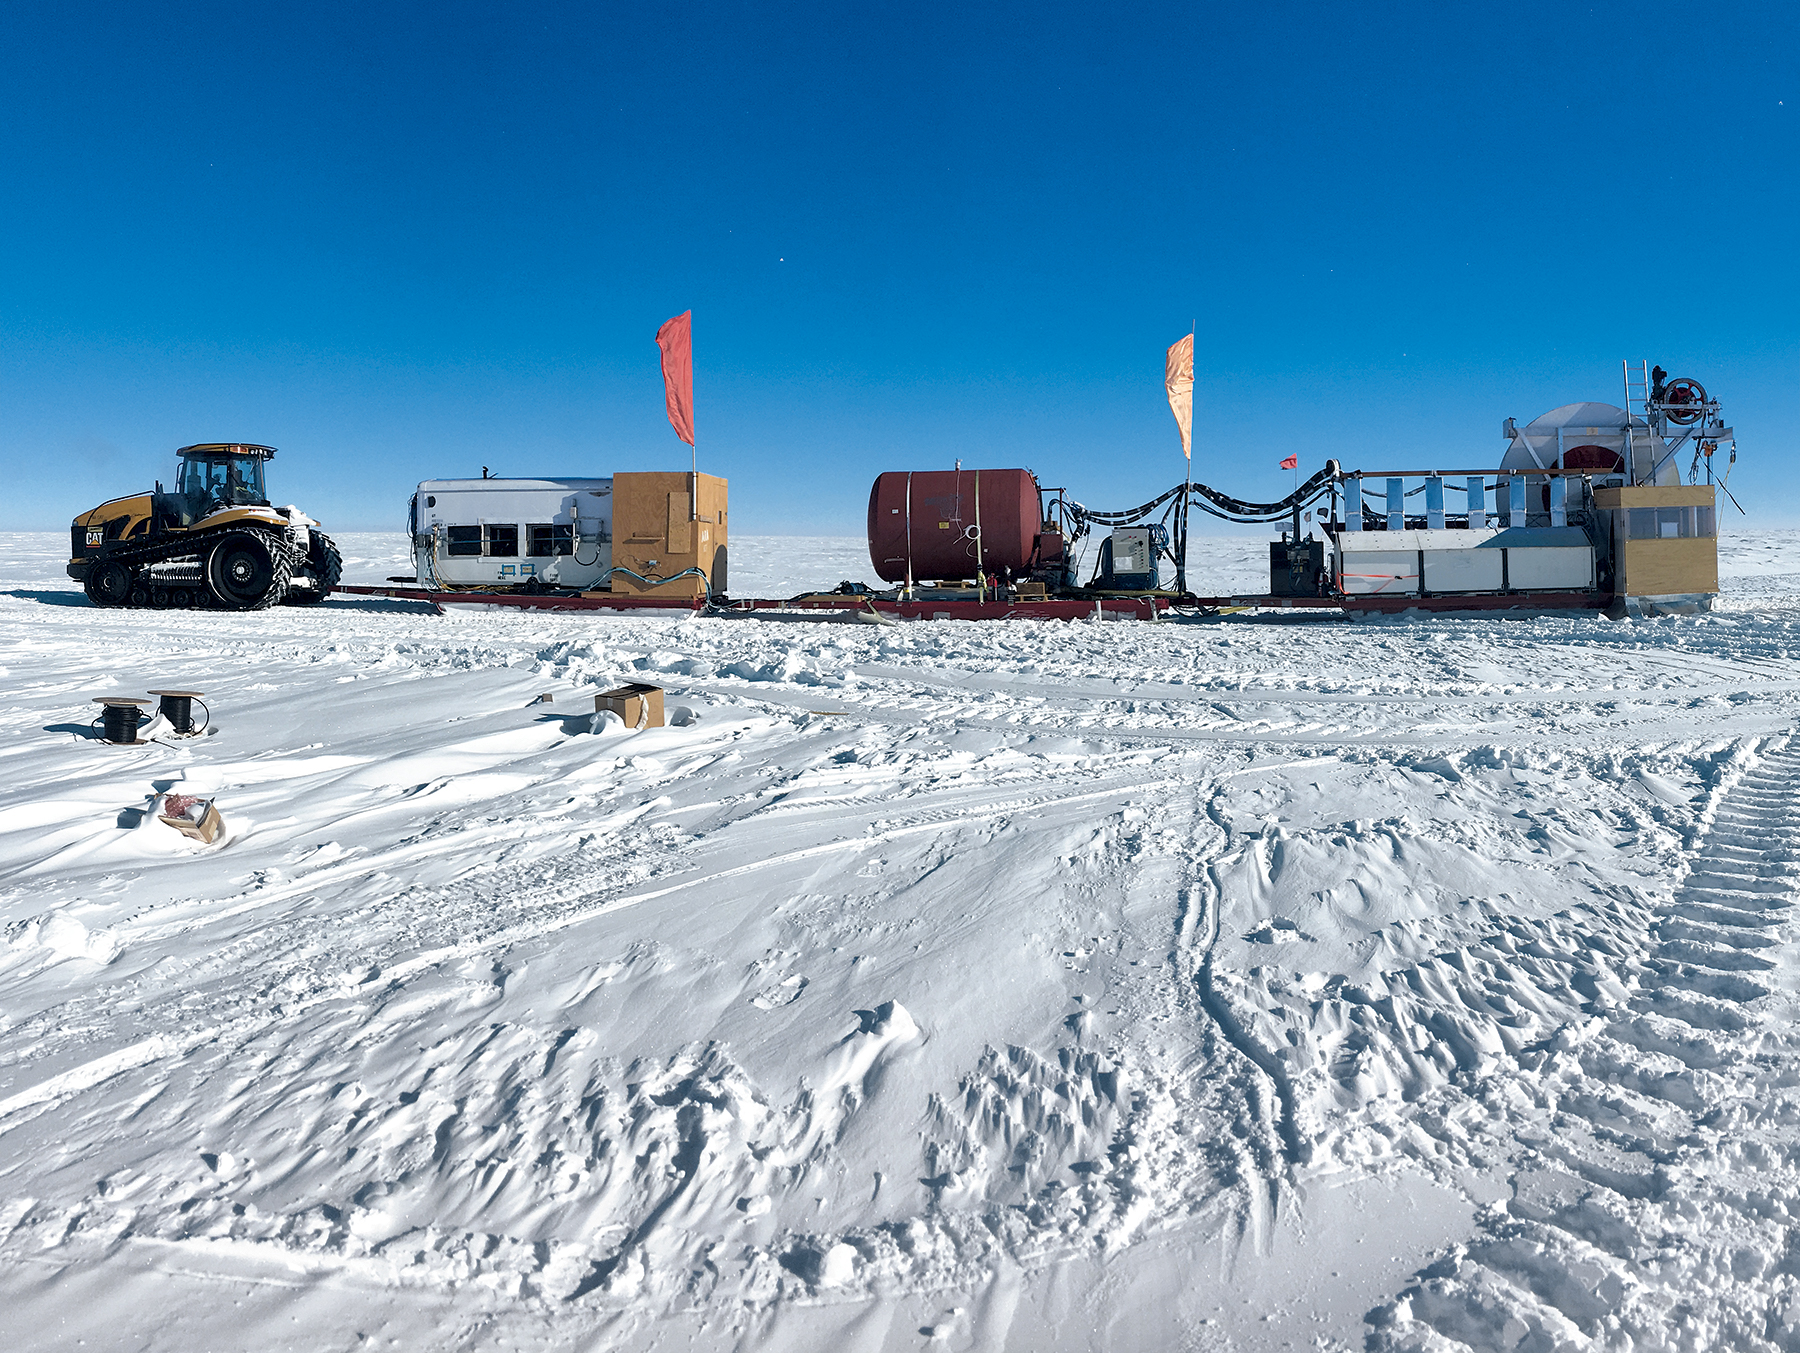 A photo of an Antarctic landscape. They sky is bright, deep blue and cloudless. The ground is covered with snow and tire tracks. A a large tractor towing scientific equipment is parked in the snow.